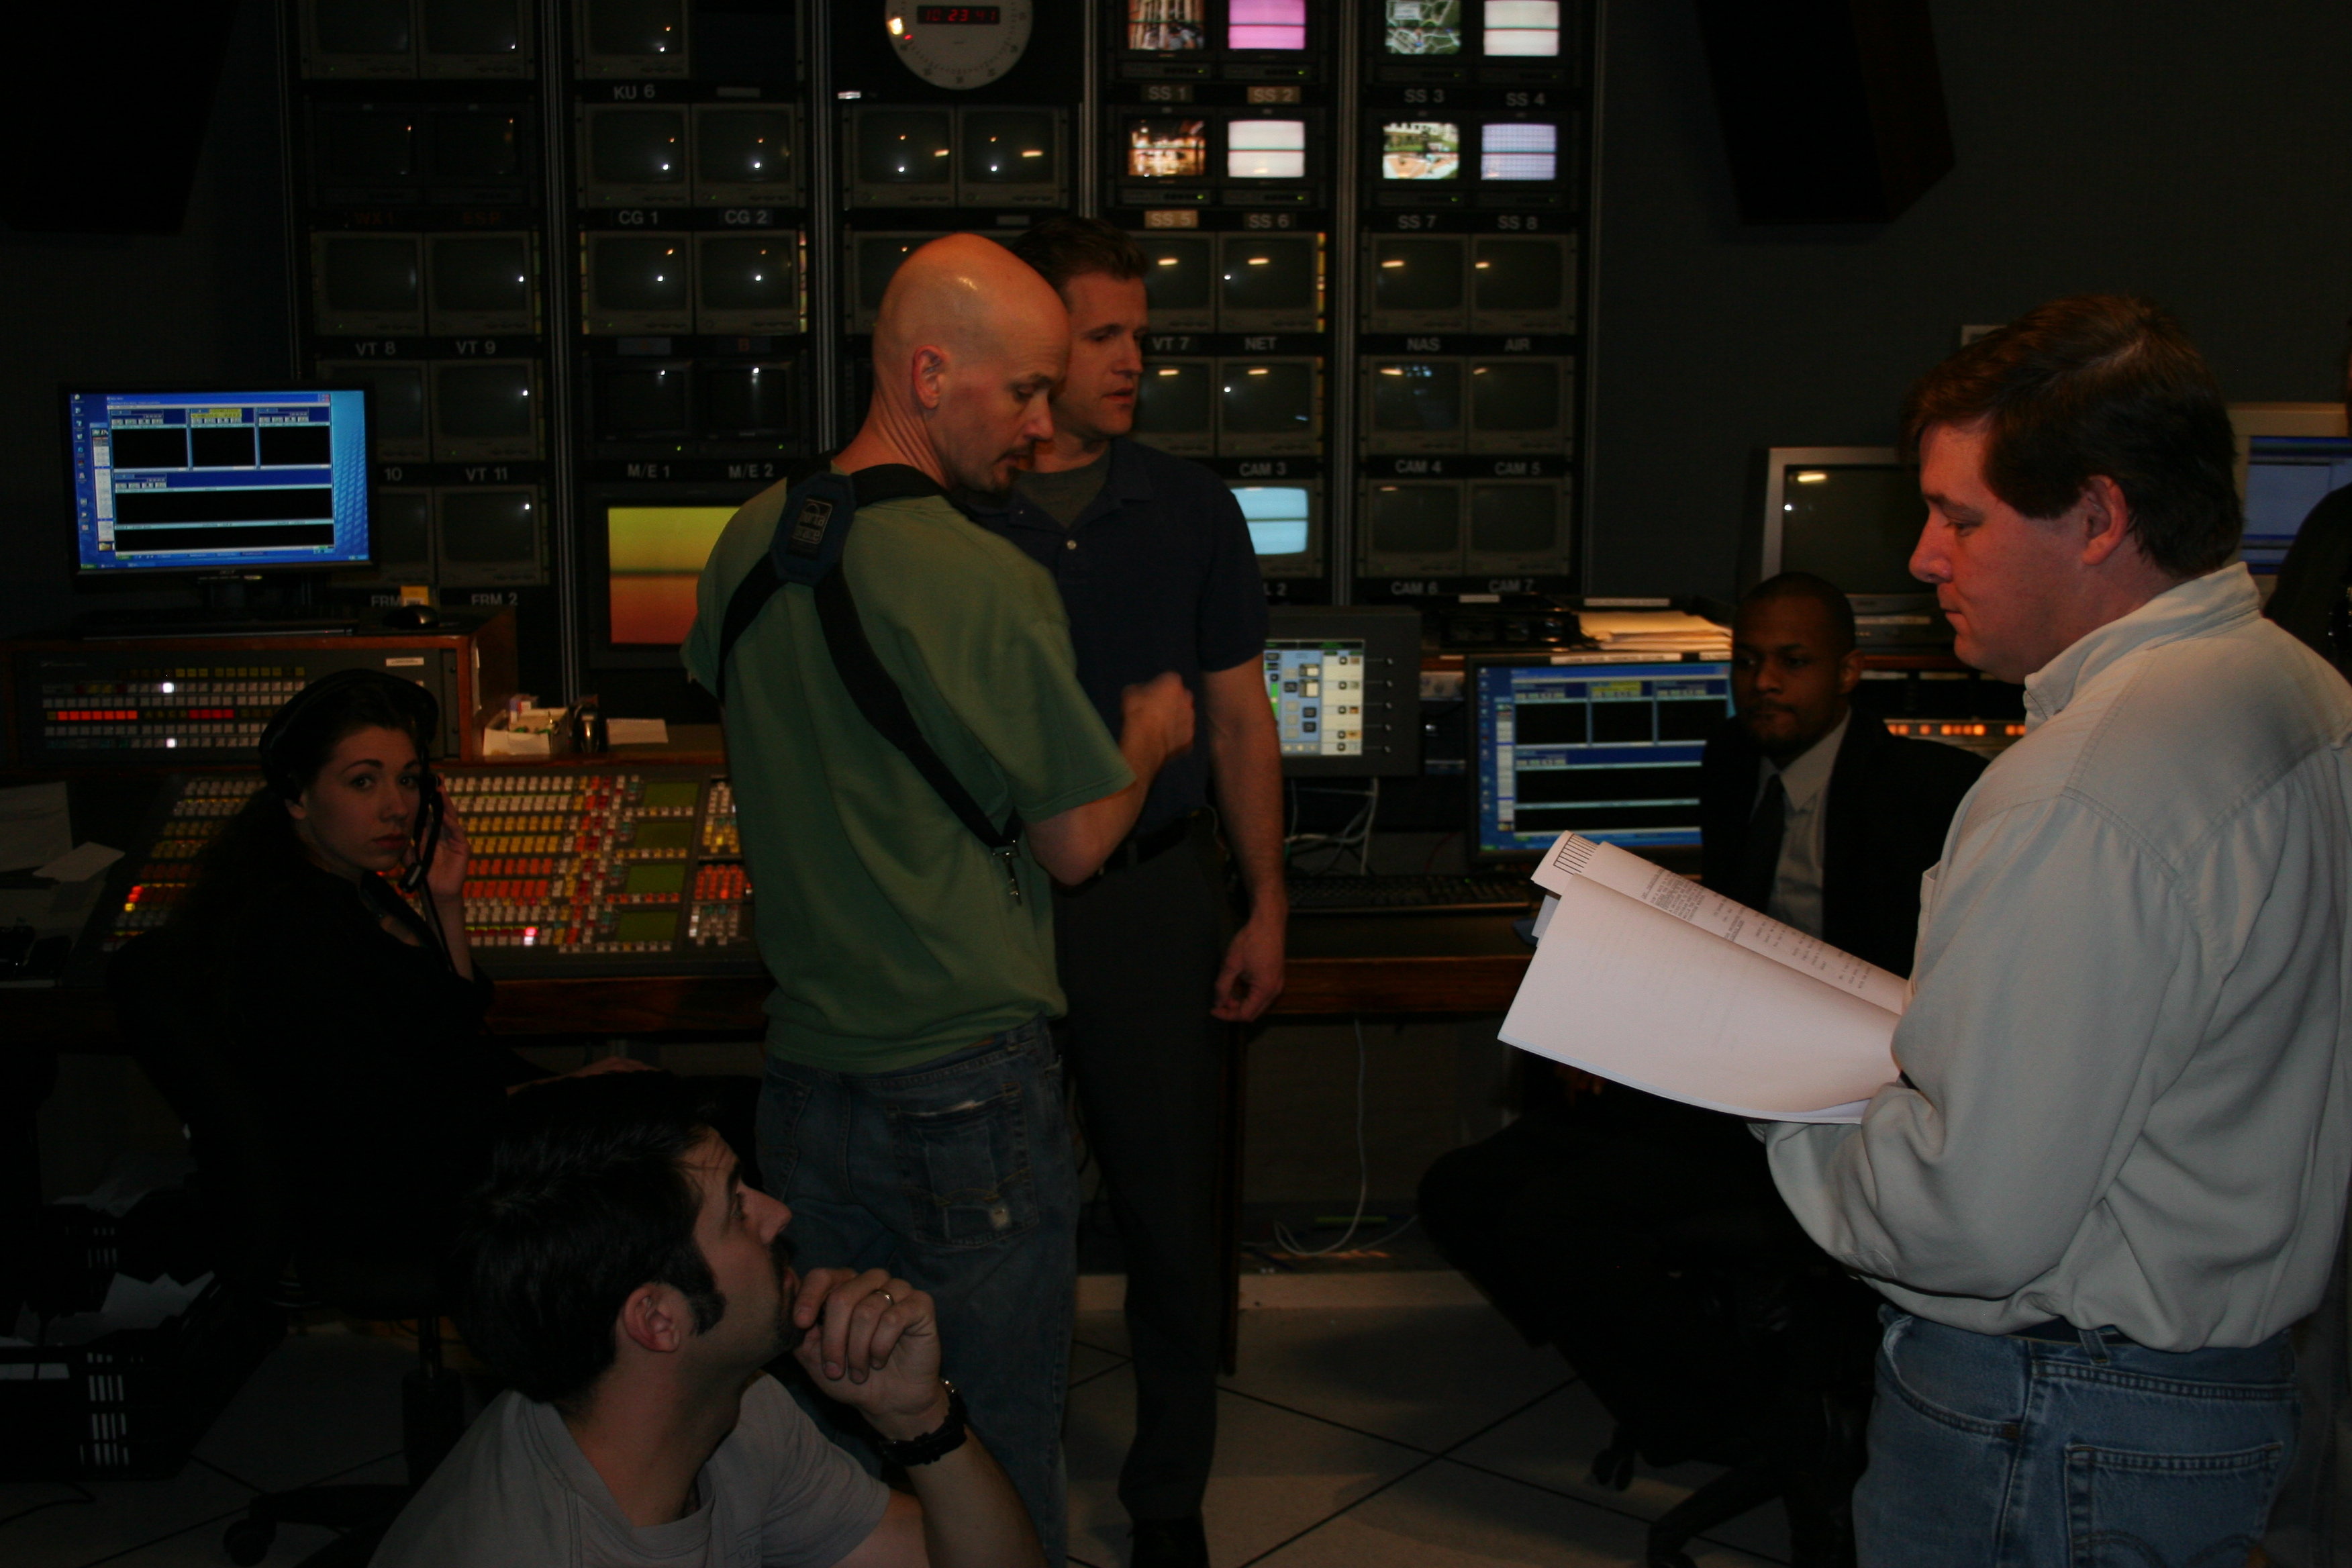 Associate Director Richard Lesko, right,prepares for the control room scene with cast and crew.